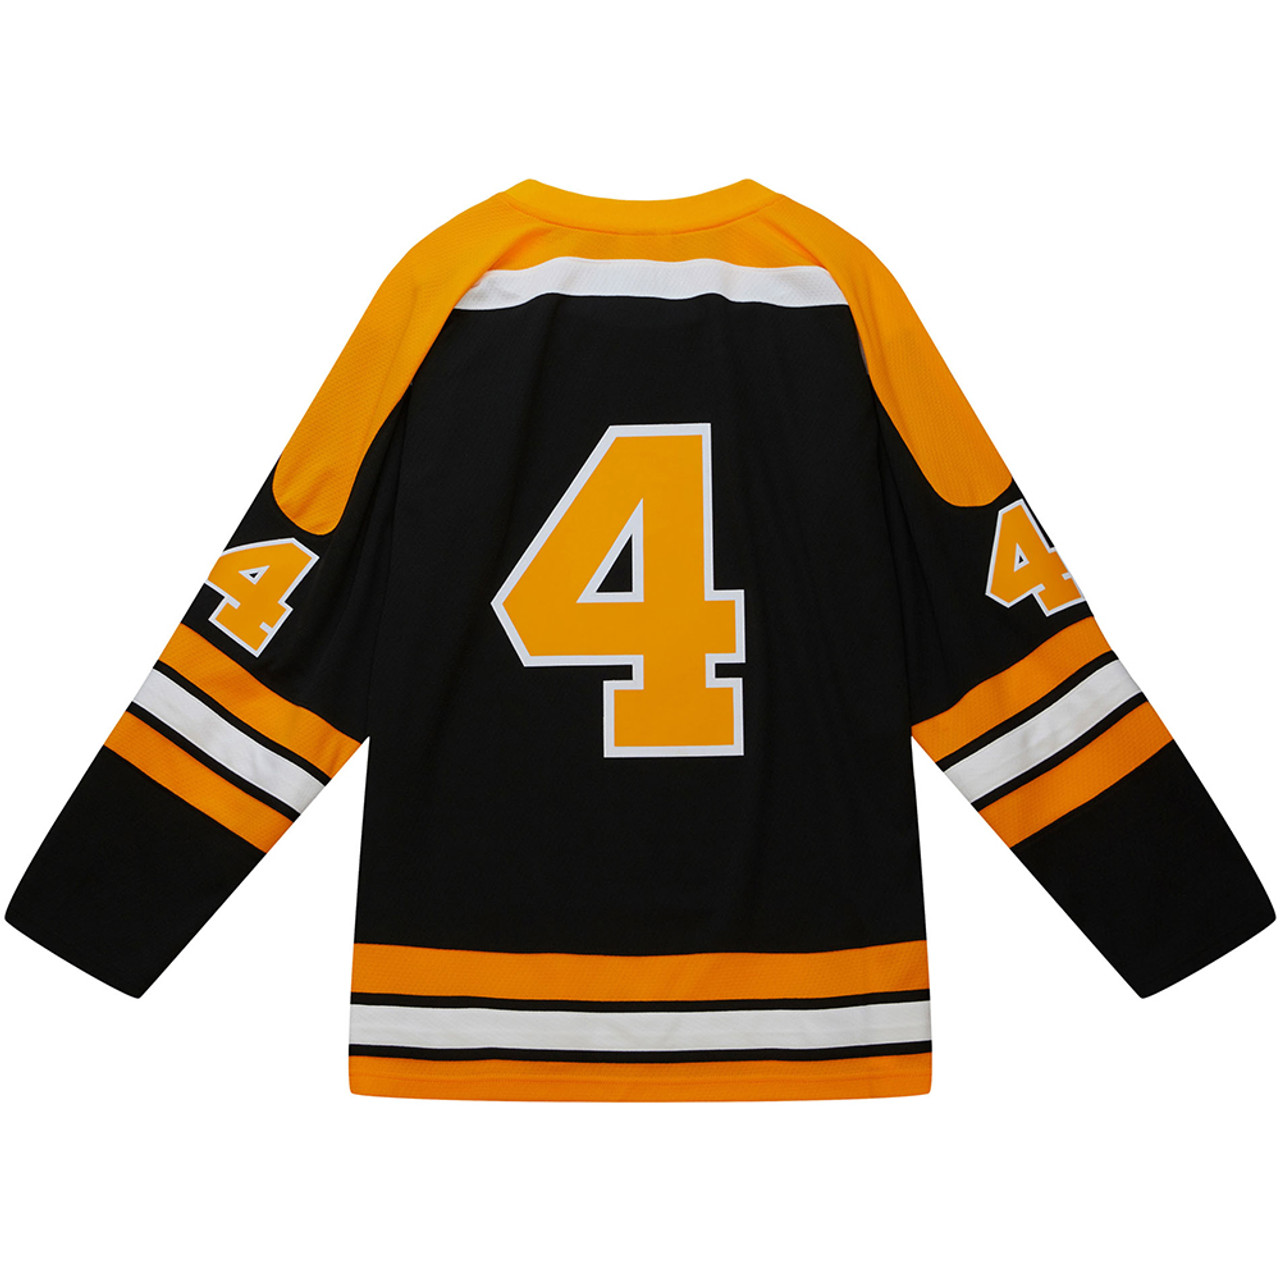 Bobby Orr Autographed Boston Bruins Replica Jersey